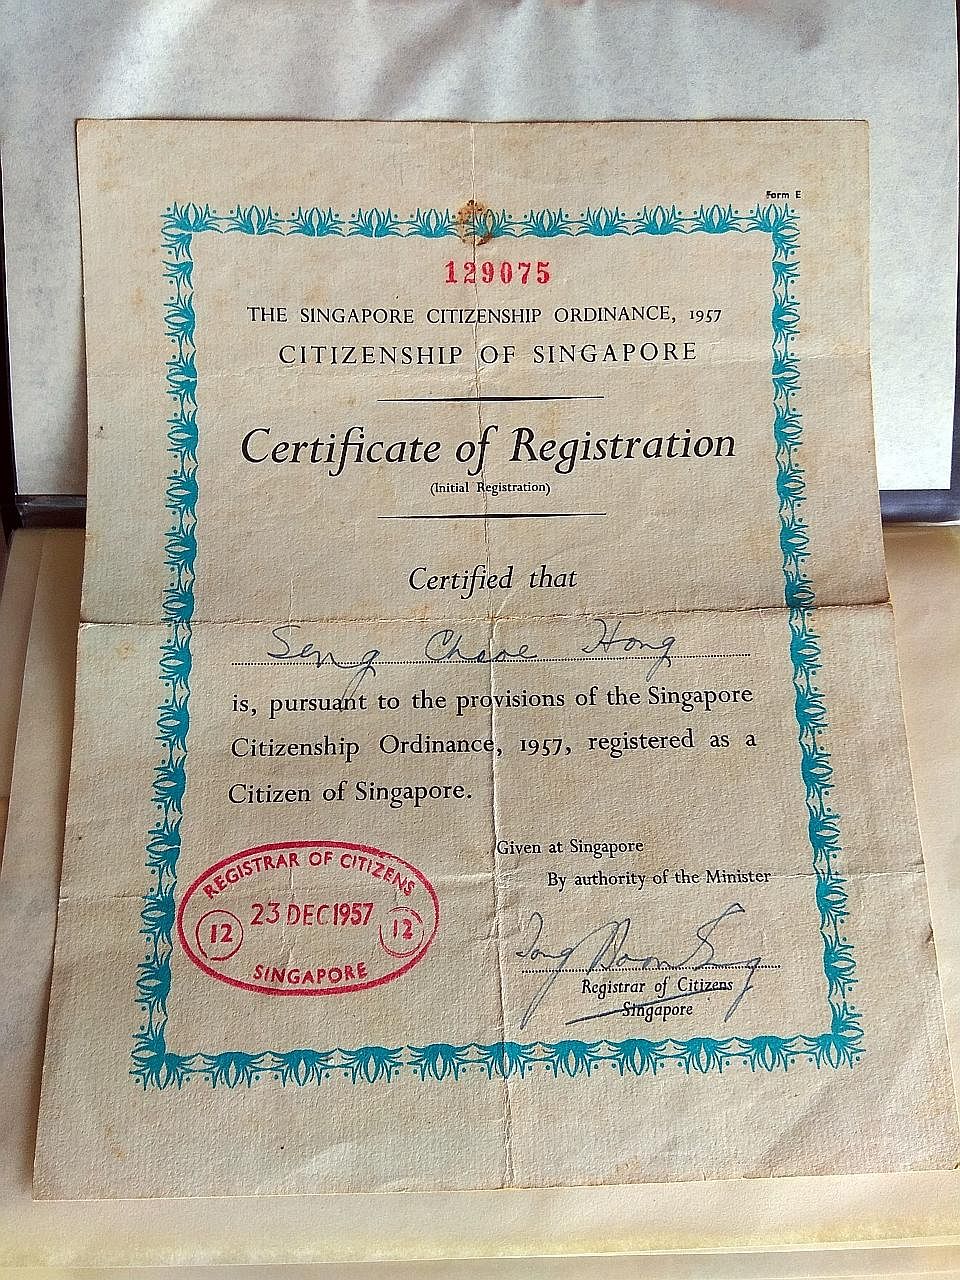 Mr Seng Chek Hong (above) registered as a Singapore citizen in 1957 (left), renouncing his Chinese citizenship. He did so at a time when others from China hesitated, said his grandson.